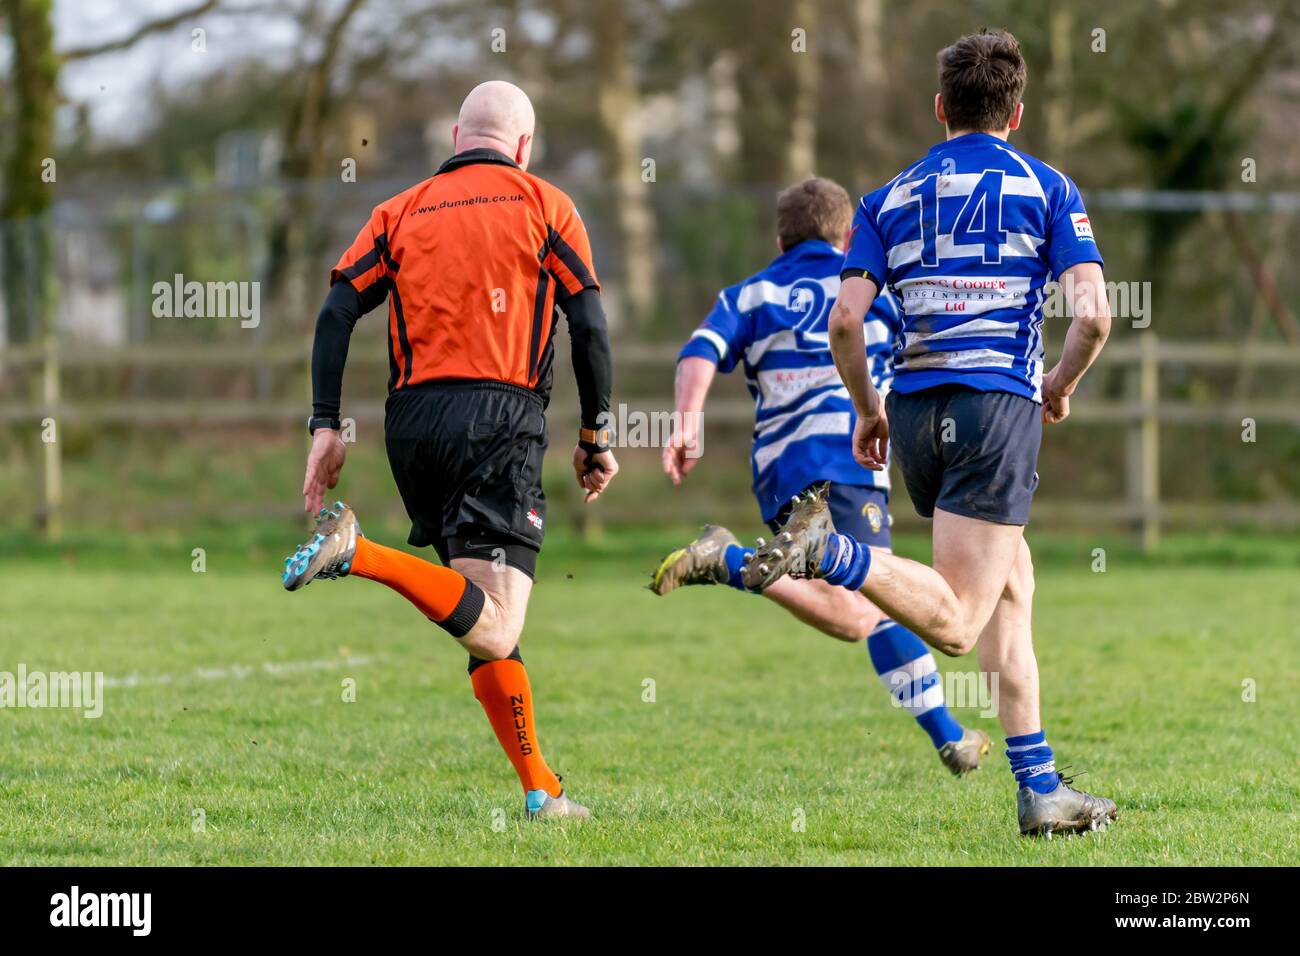 Two players and the referee run away from camera, with leg shape synchronised. Eastern Counties rugby union match at Lowestoft Stock Photo